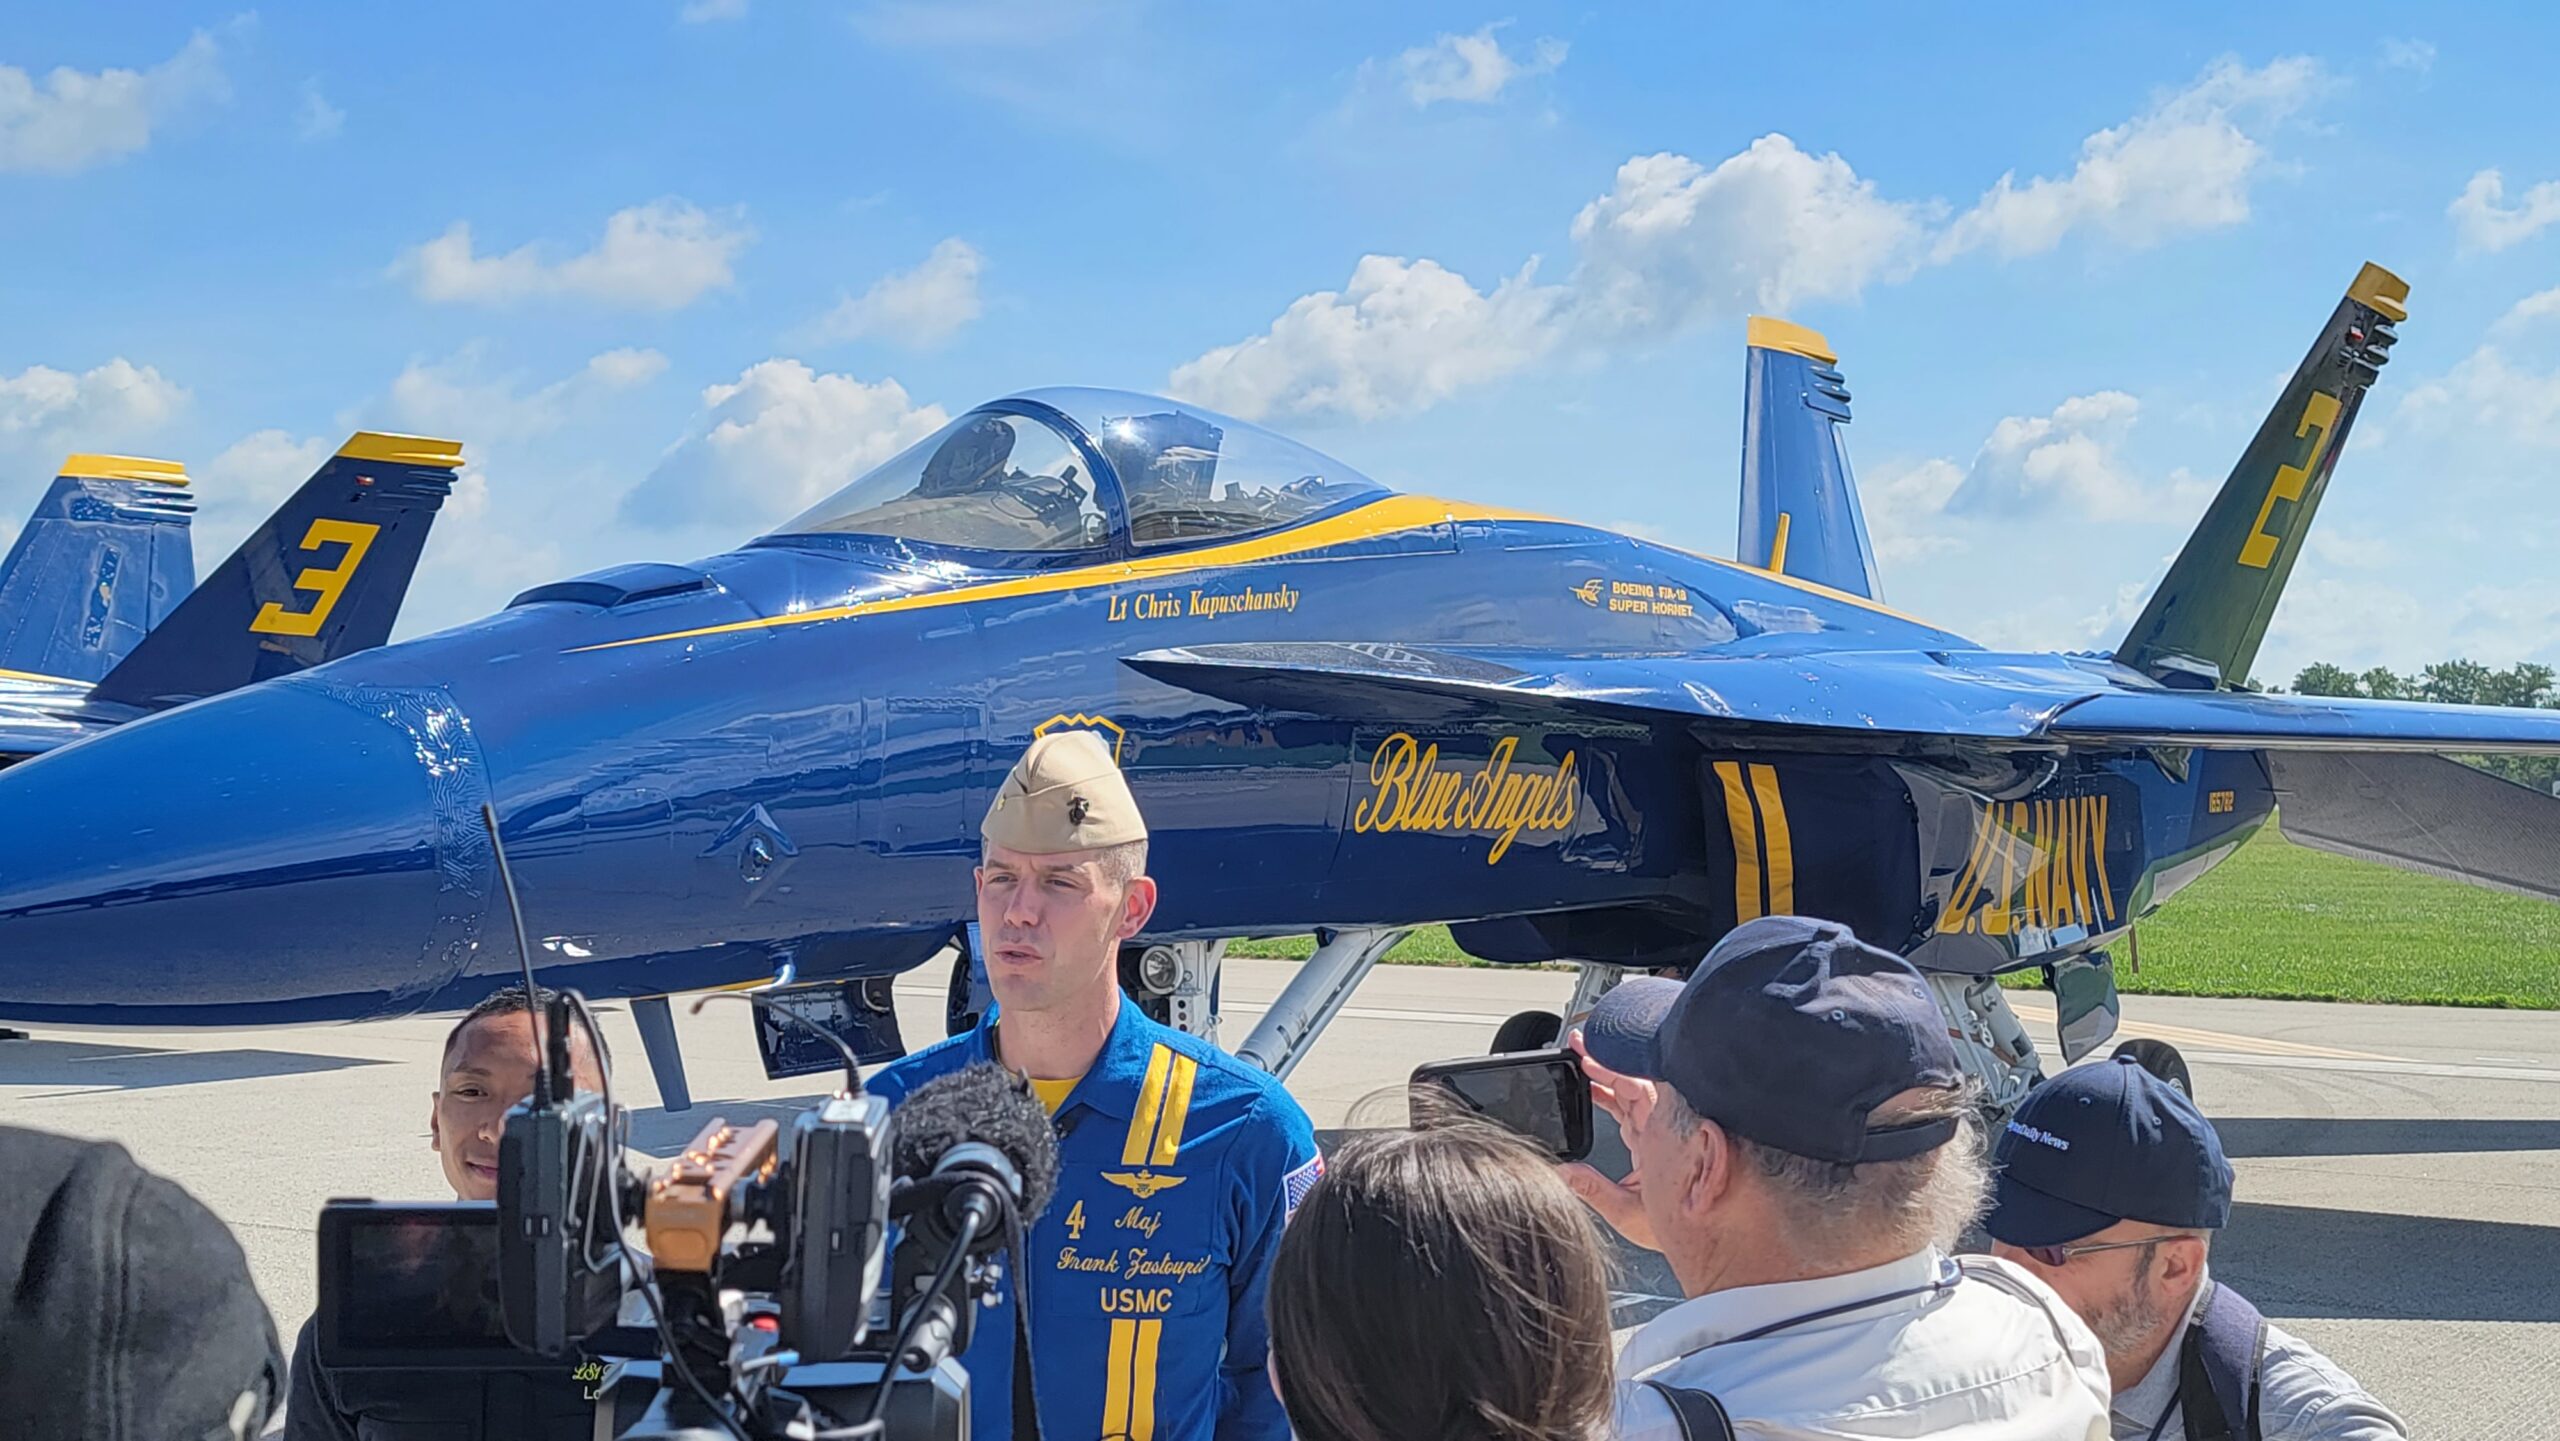 Blue Angels Pilot being interviewed in front of aircraft